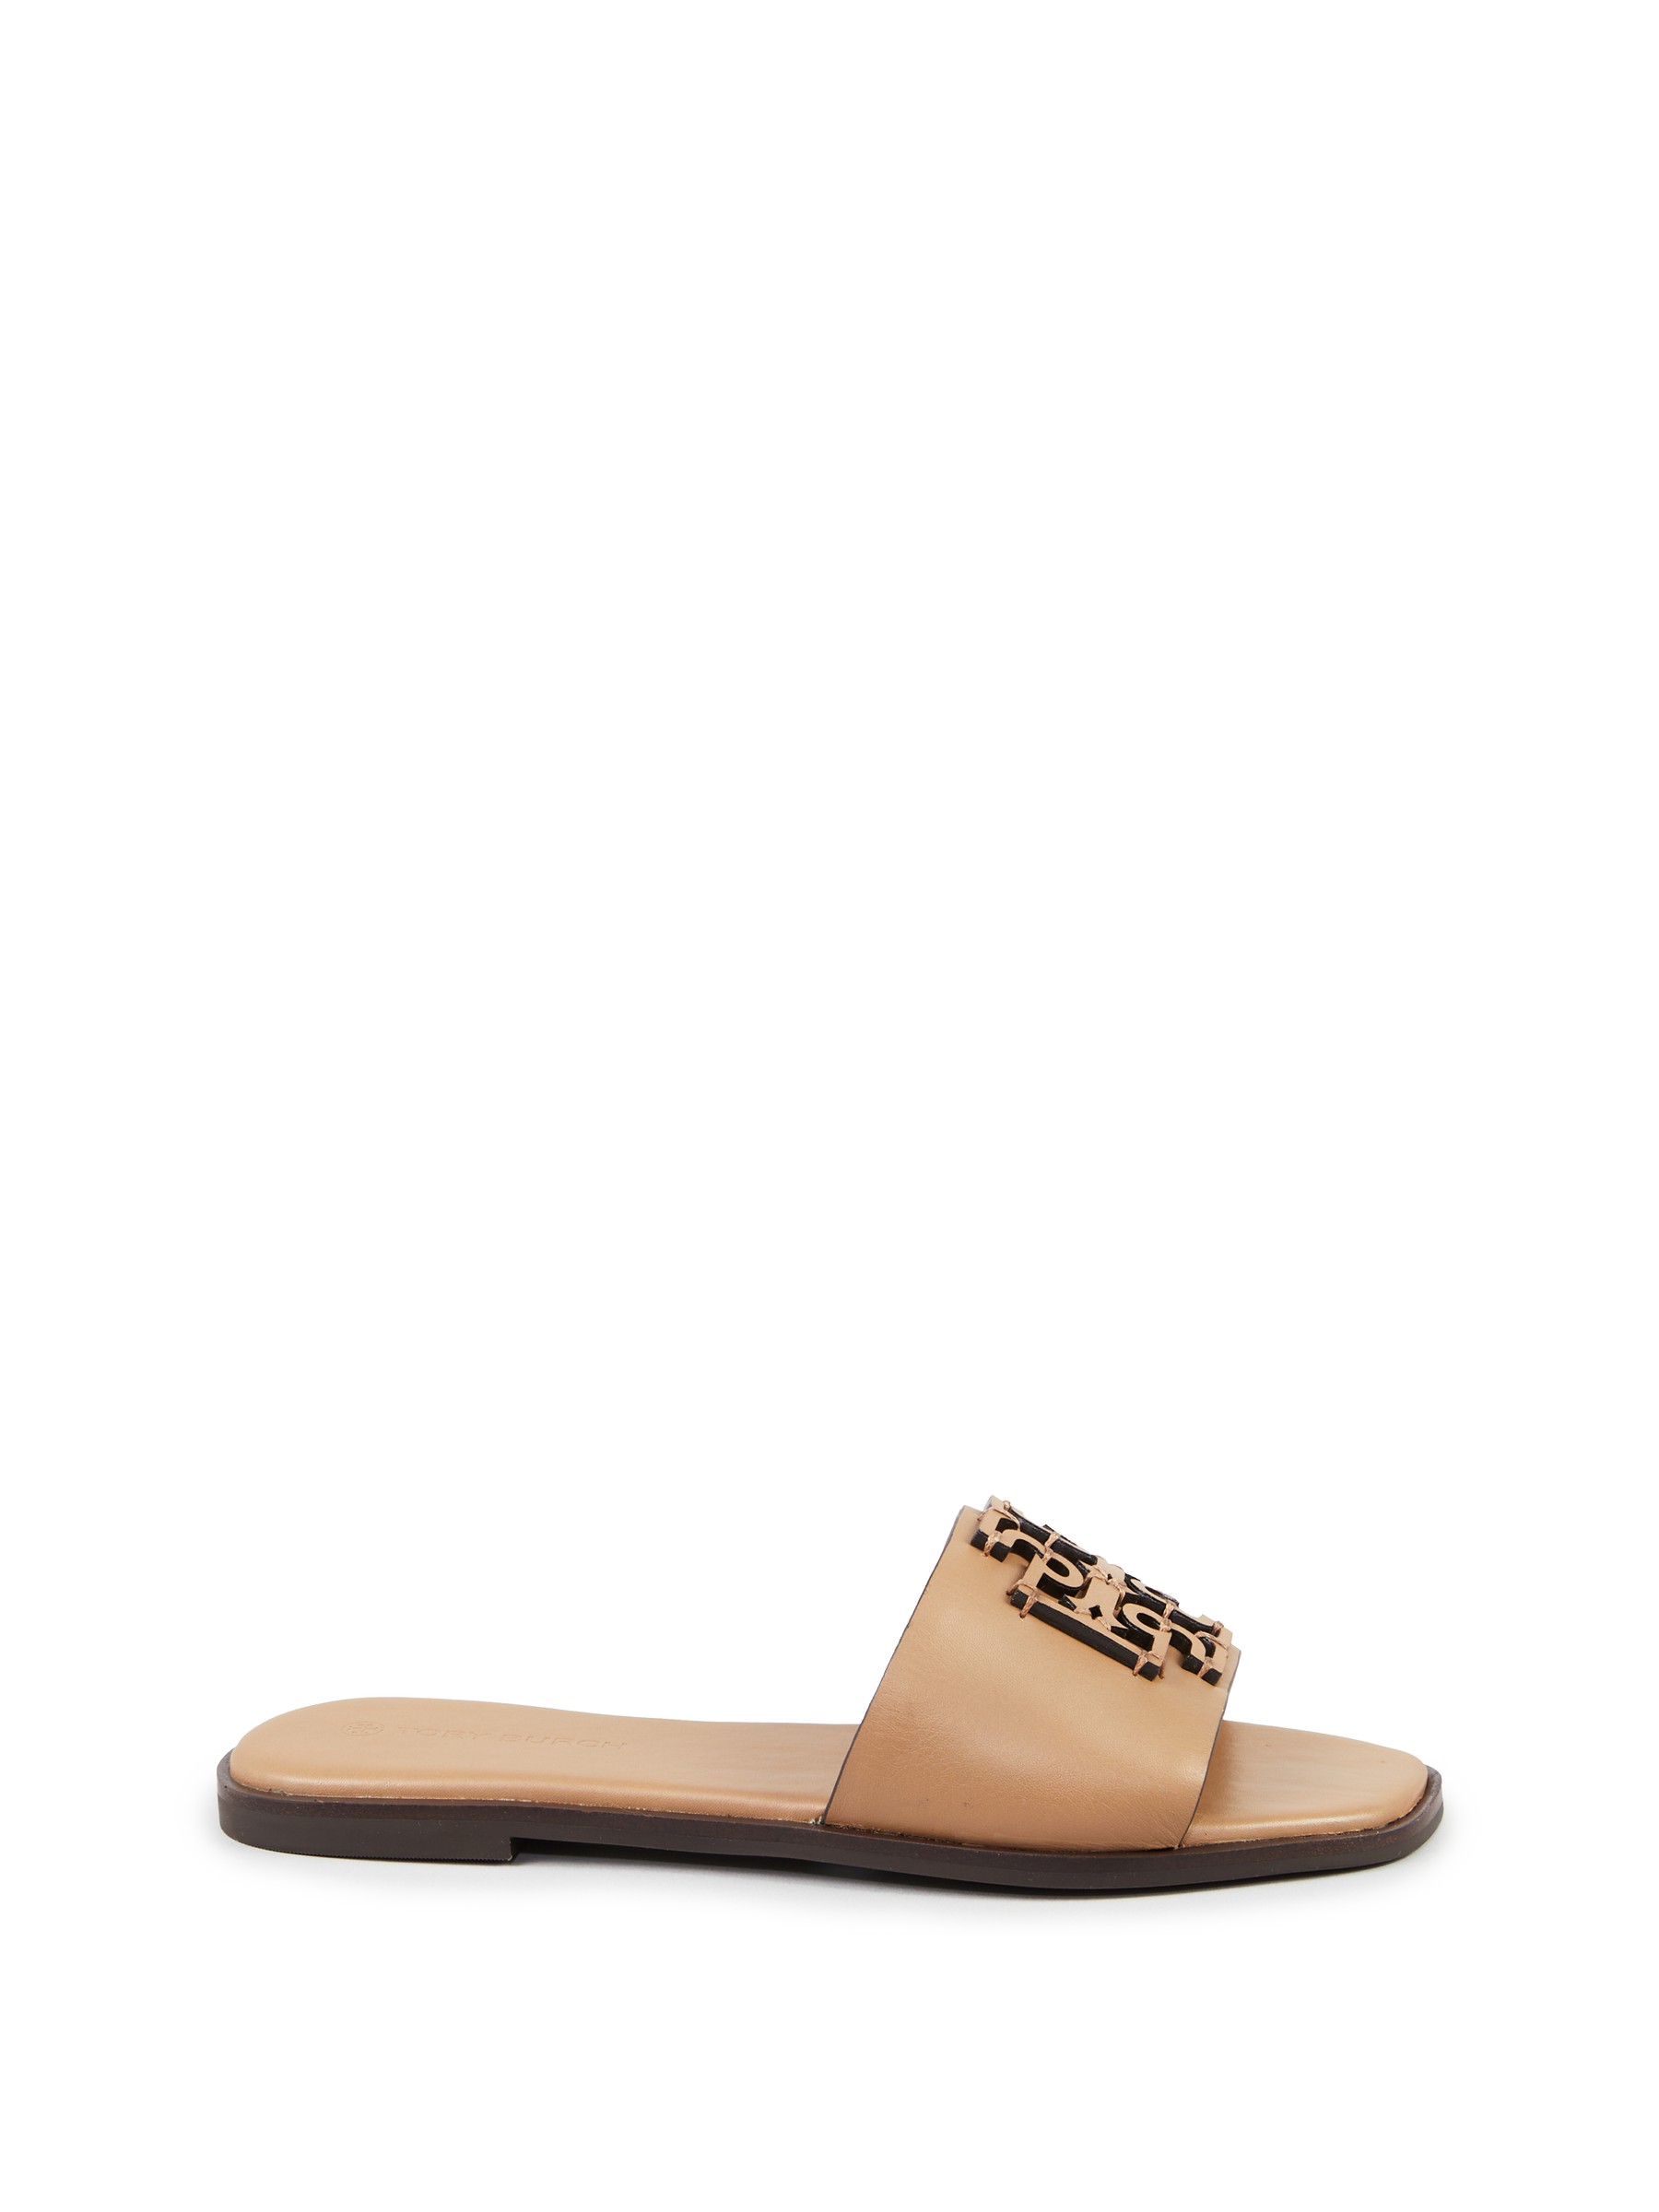 Tory Burch Sandals 'Ines' Brown | Heeled Sandals